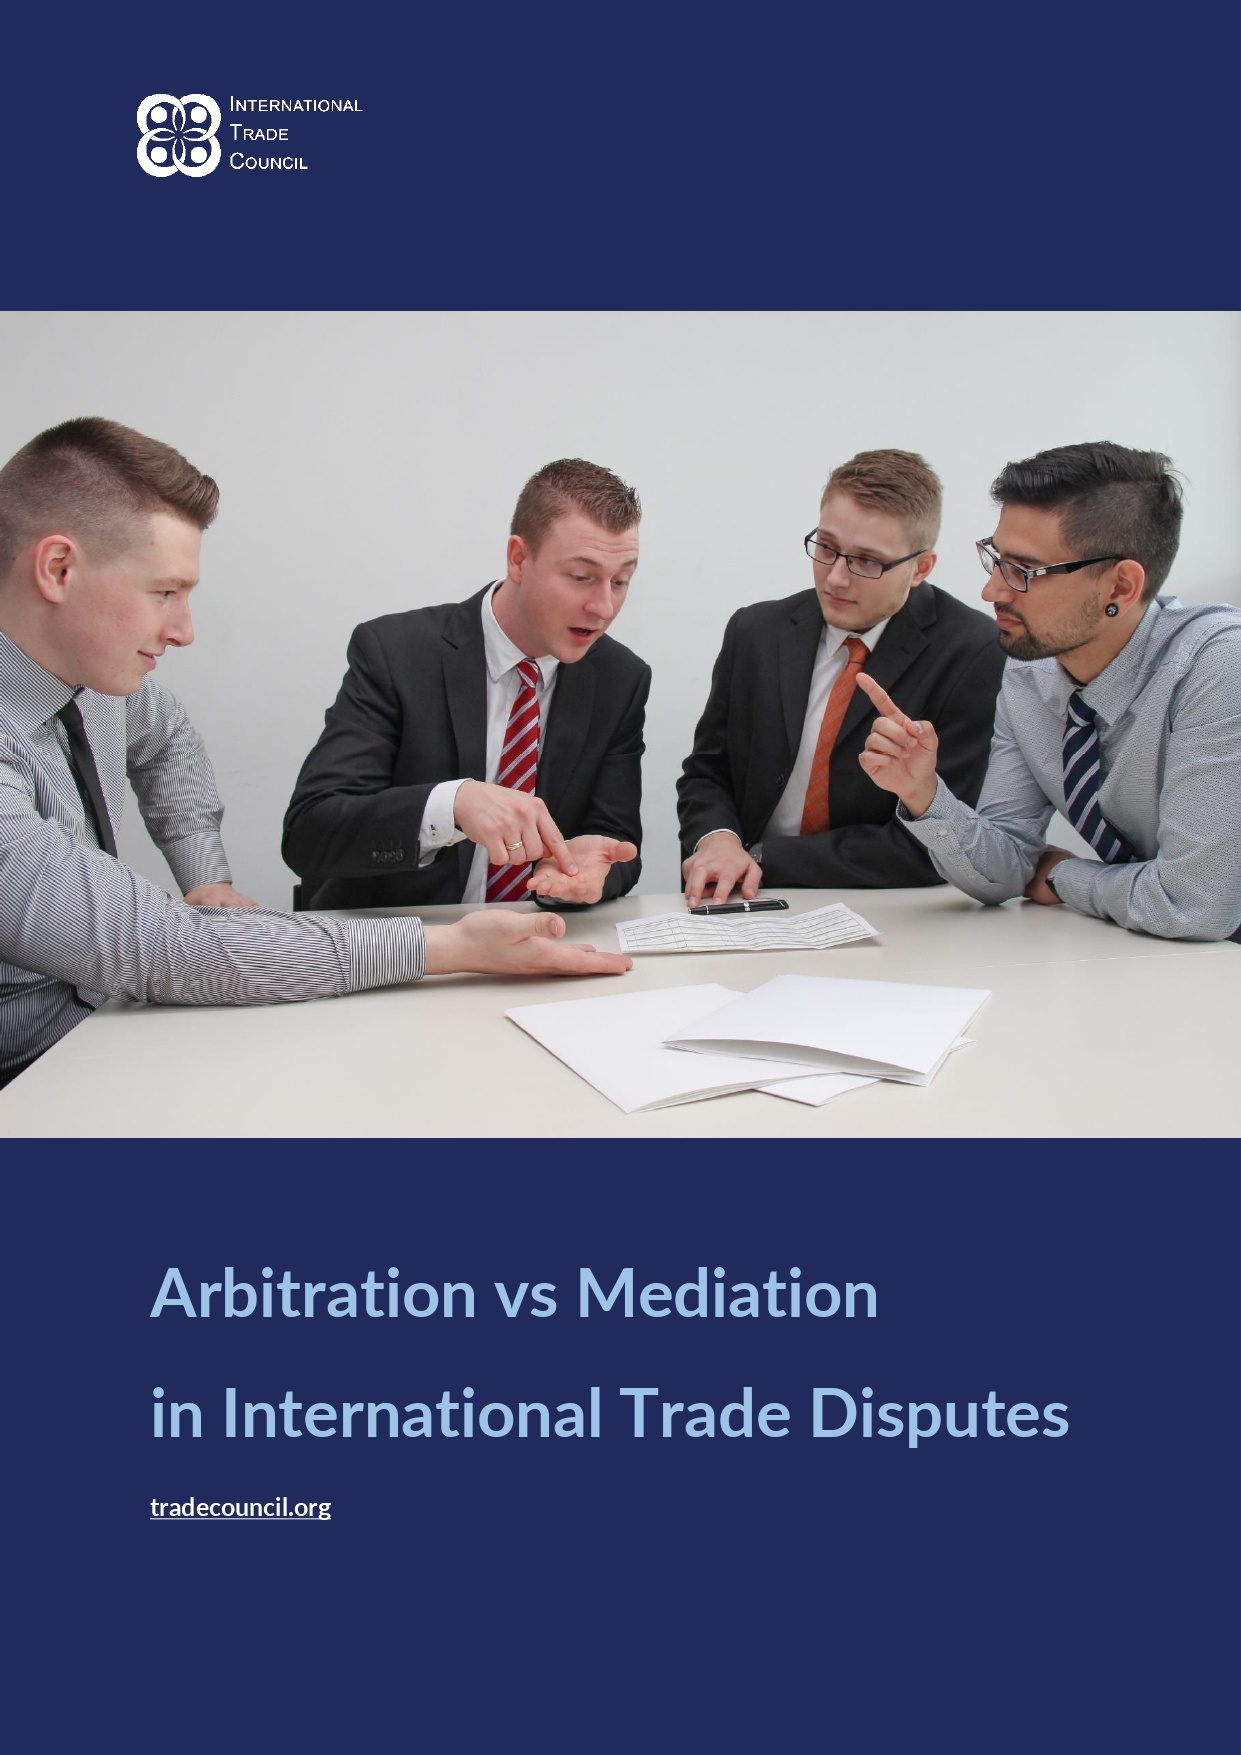 Arbitration vs Mediation in International Trade Disputes. A free publication by the International Trade Council.